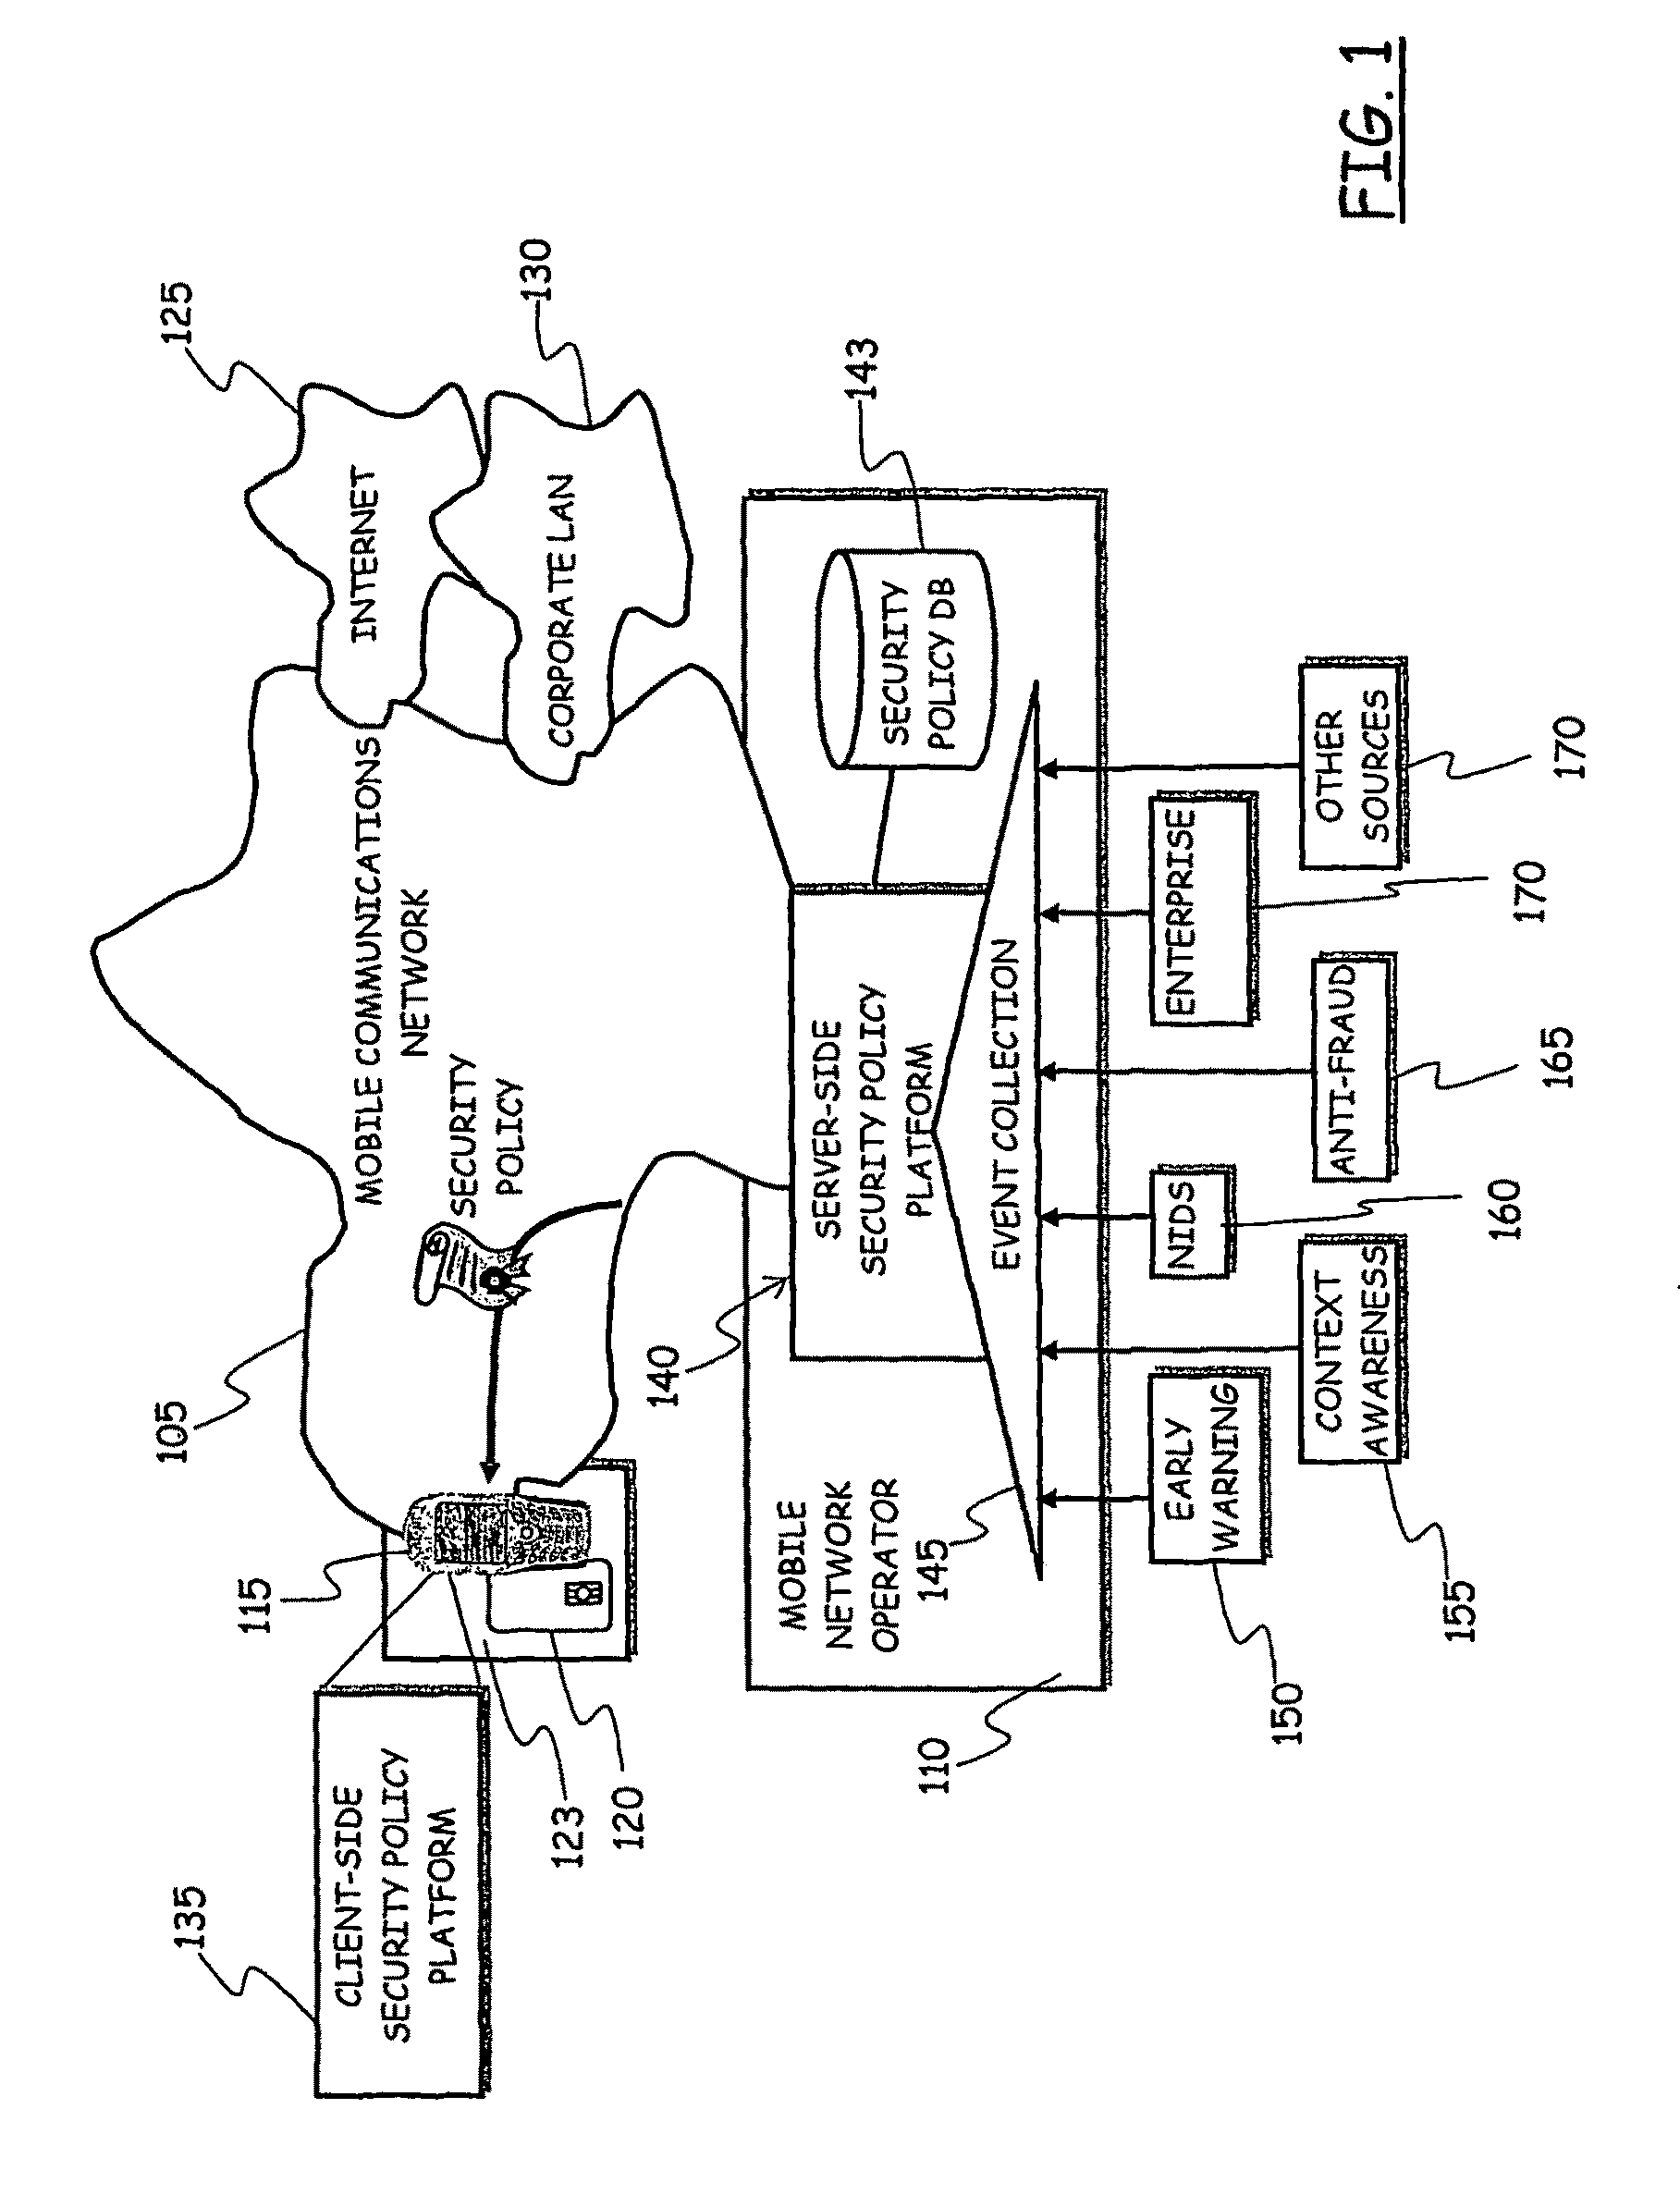 System for enforcing security policies on mobile communications devices